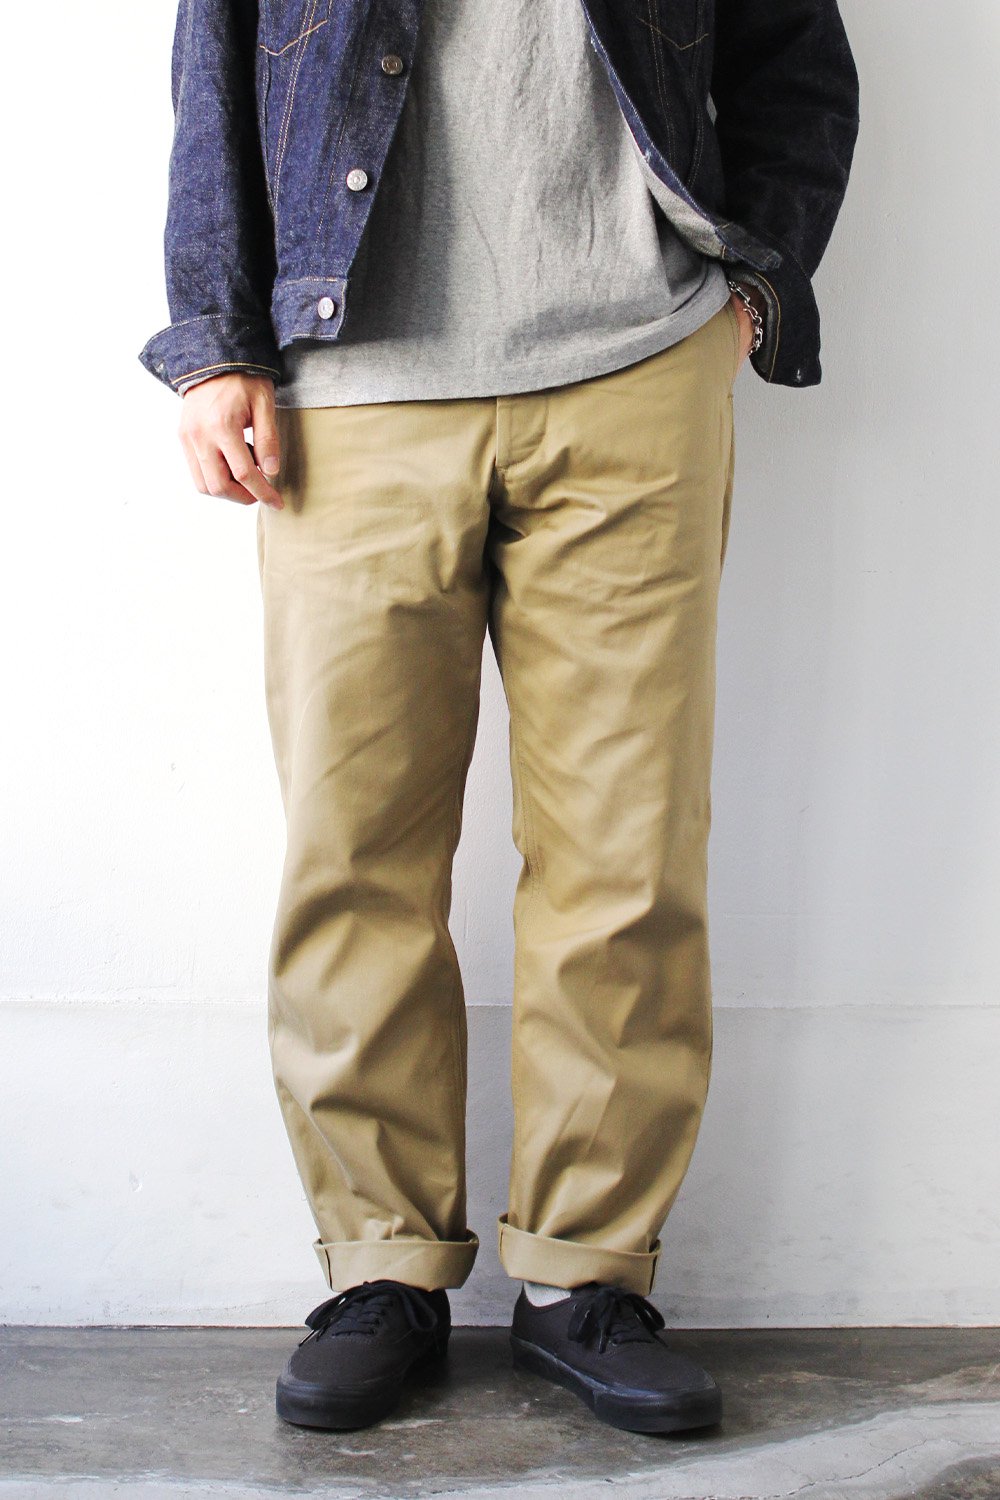 Classic Chino Trousers -Selvdge Twill- - Bricklayer *A vontade